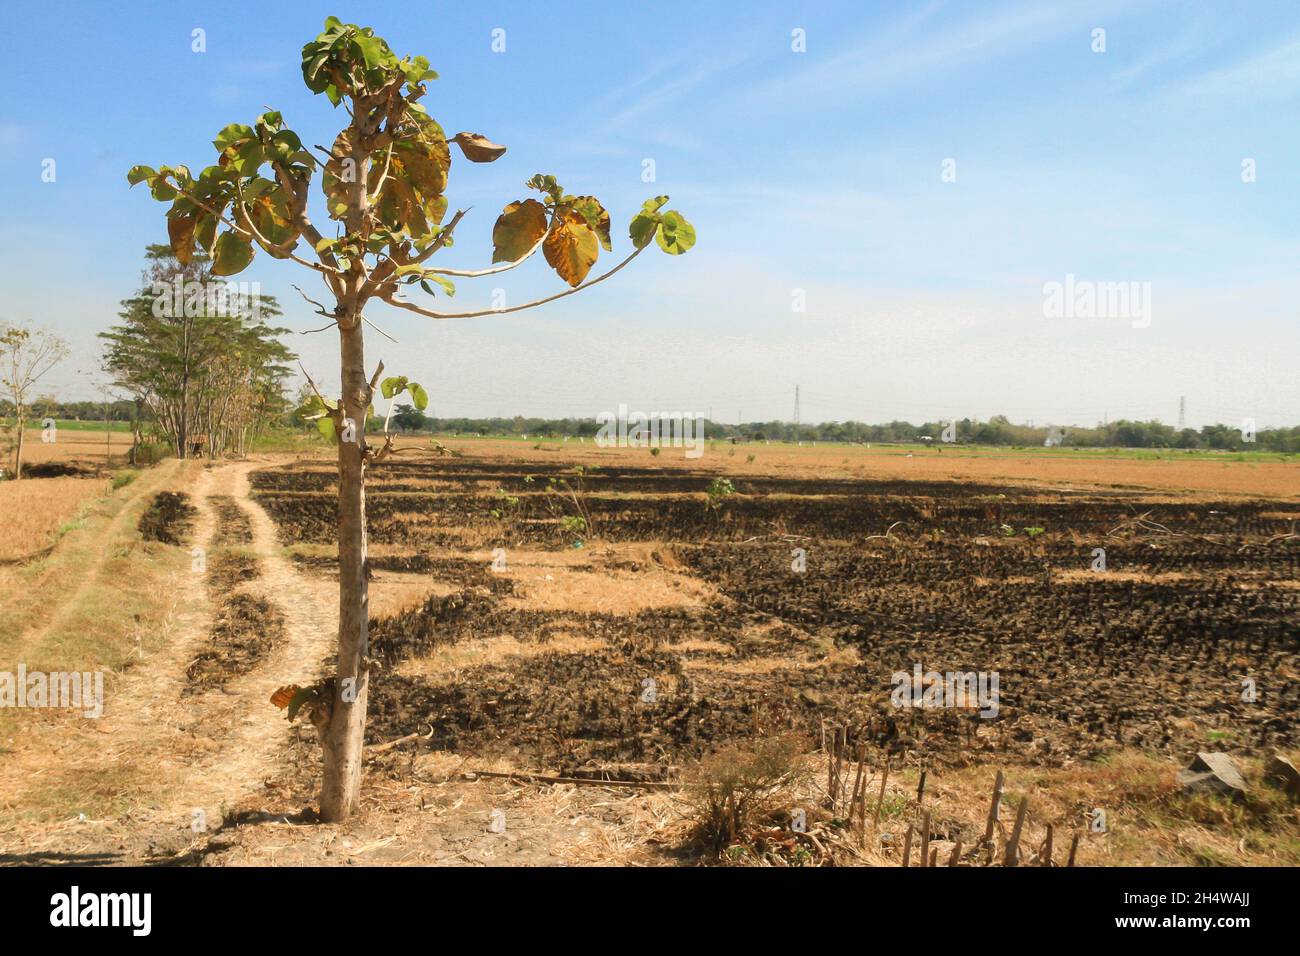 Long droughts cause agricultural areas to experience drought, some plants die and harvest failures due to climate change Stock Photo